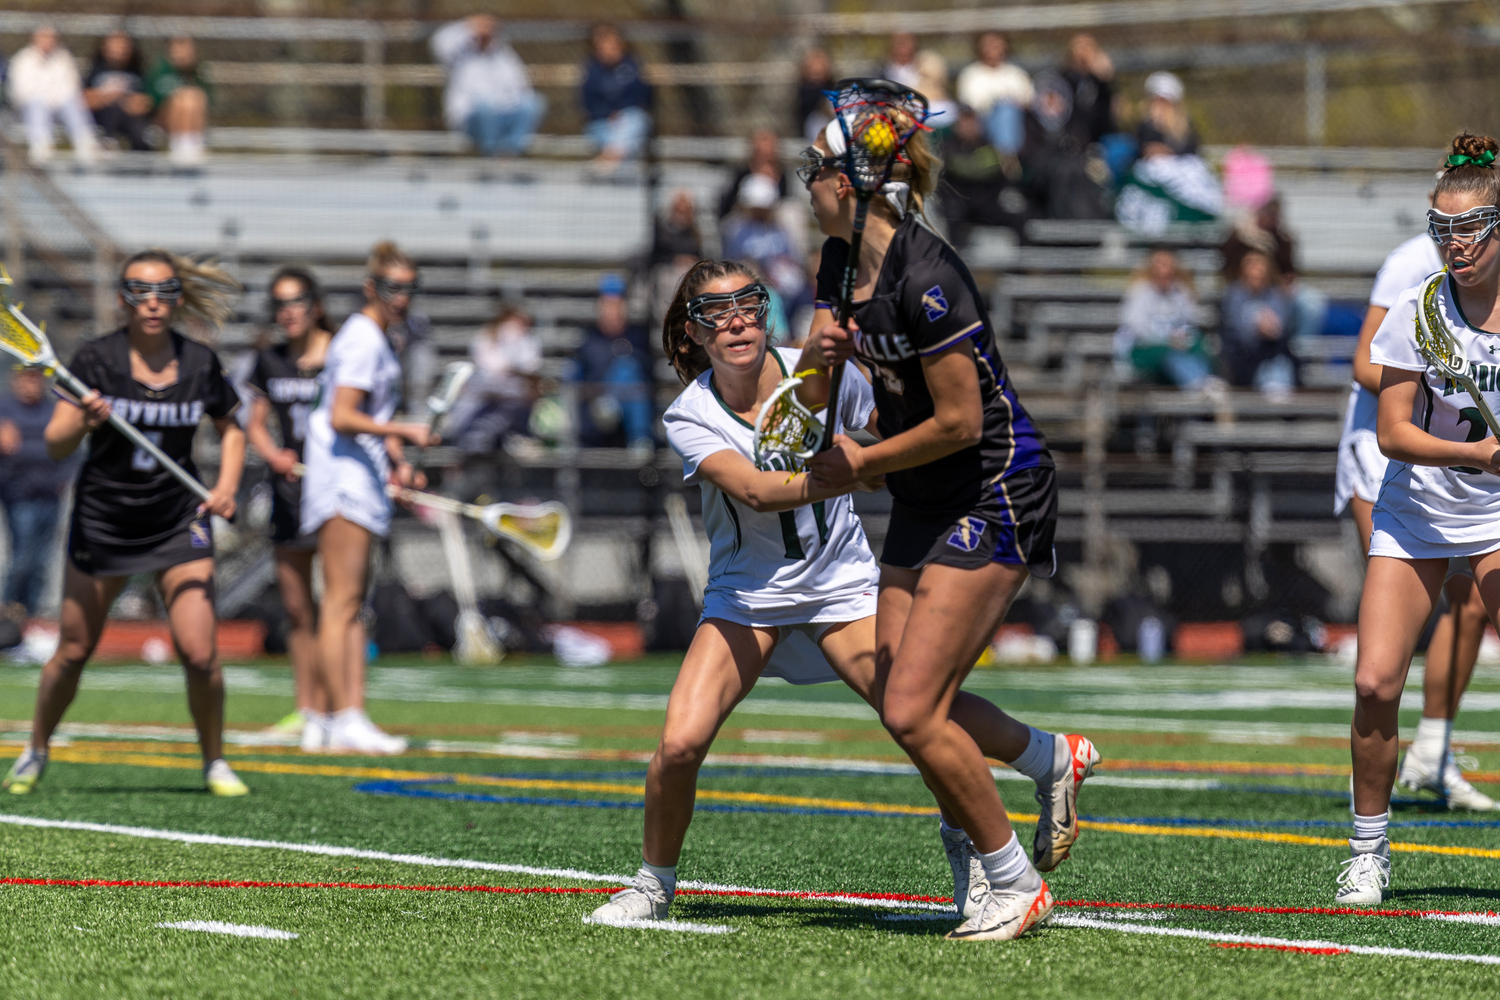 Junior defender Hailey Donahoe looks to stop an opponent in her tracks during a 9-5 loss to Sayville on April 26. RON ESPOSITO